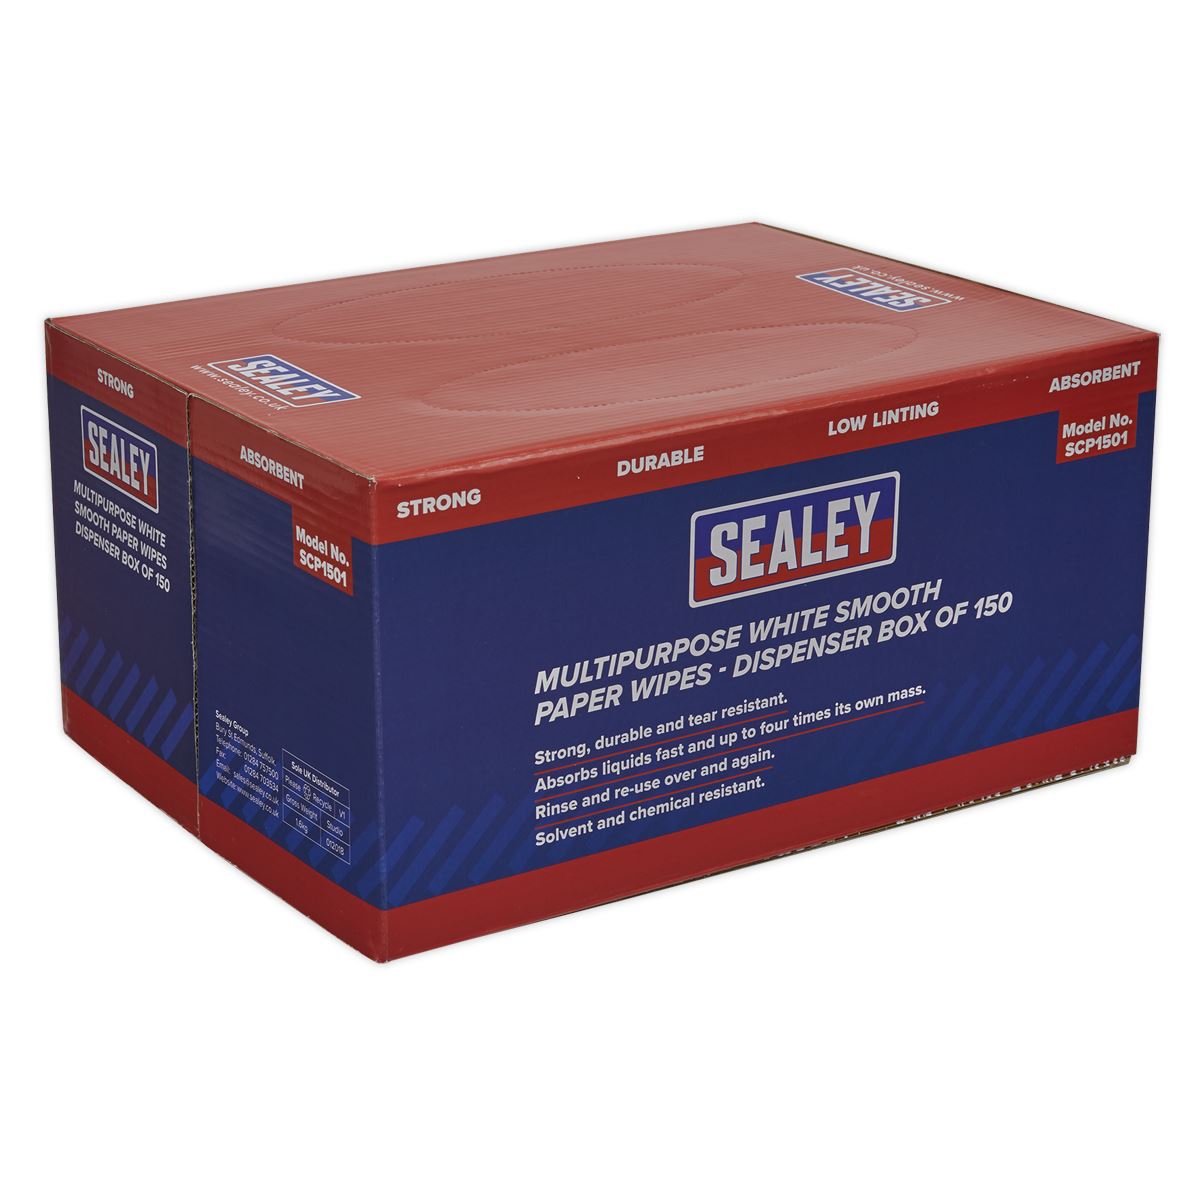 Sealey Multipurpose White Smooth Paper Wipes - Dispenser Box of 150